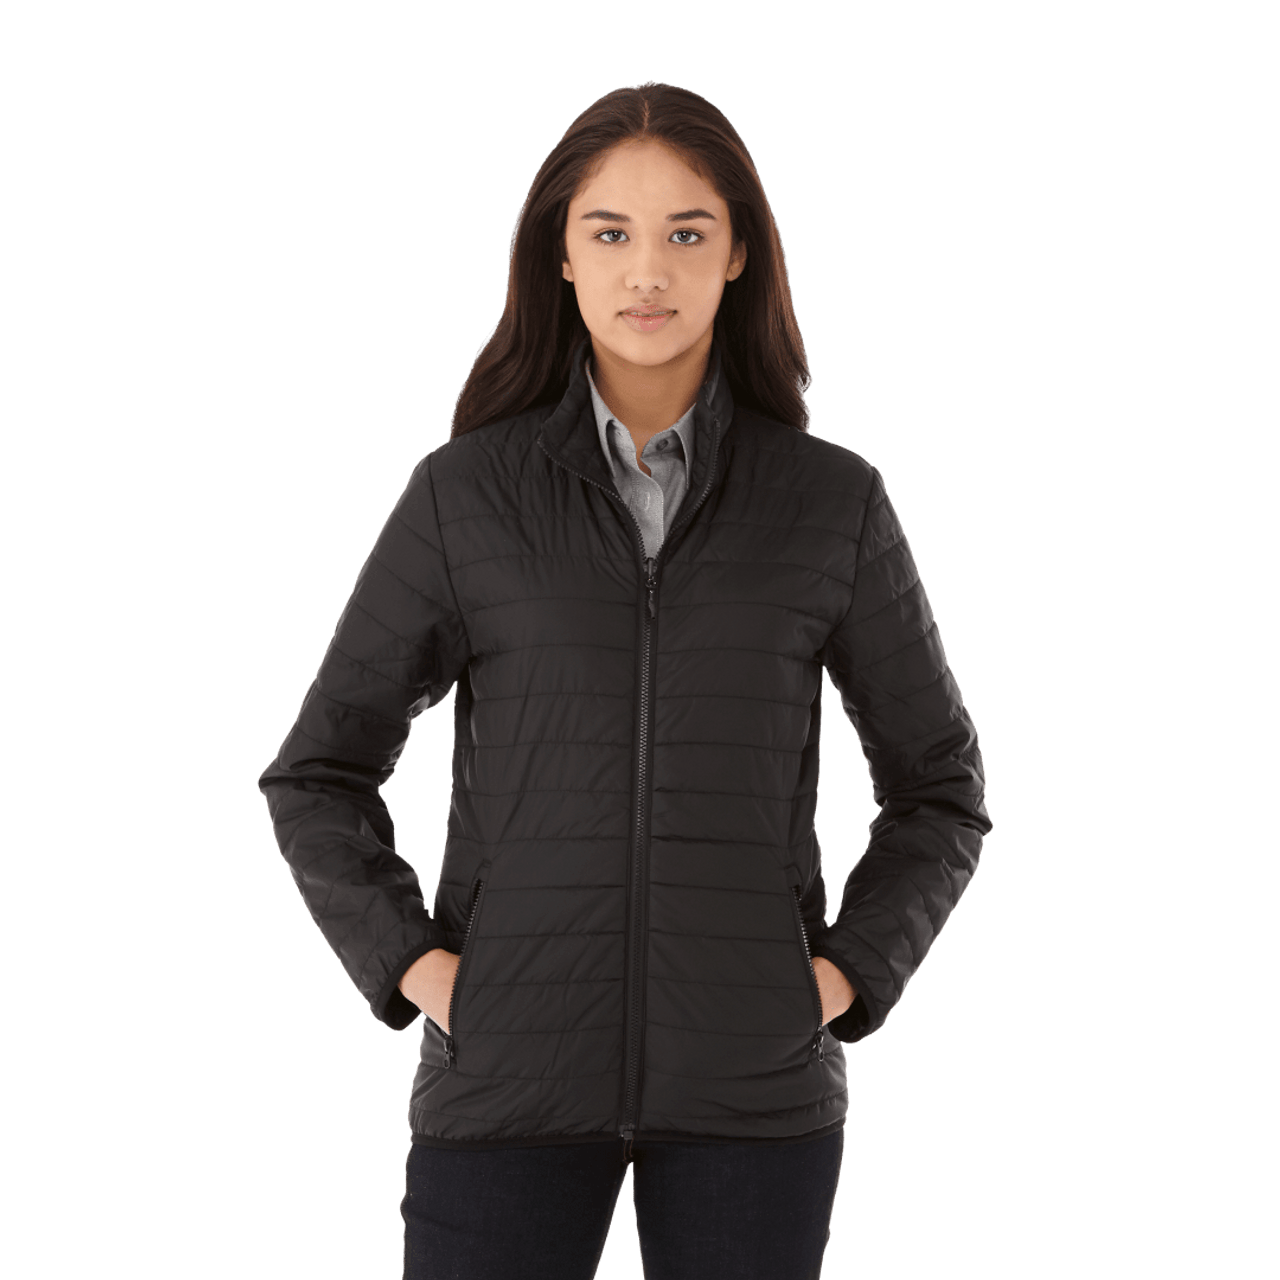 Embroidered Womens Delamar 3-in-1 Jacket